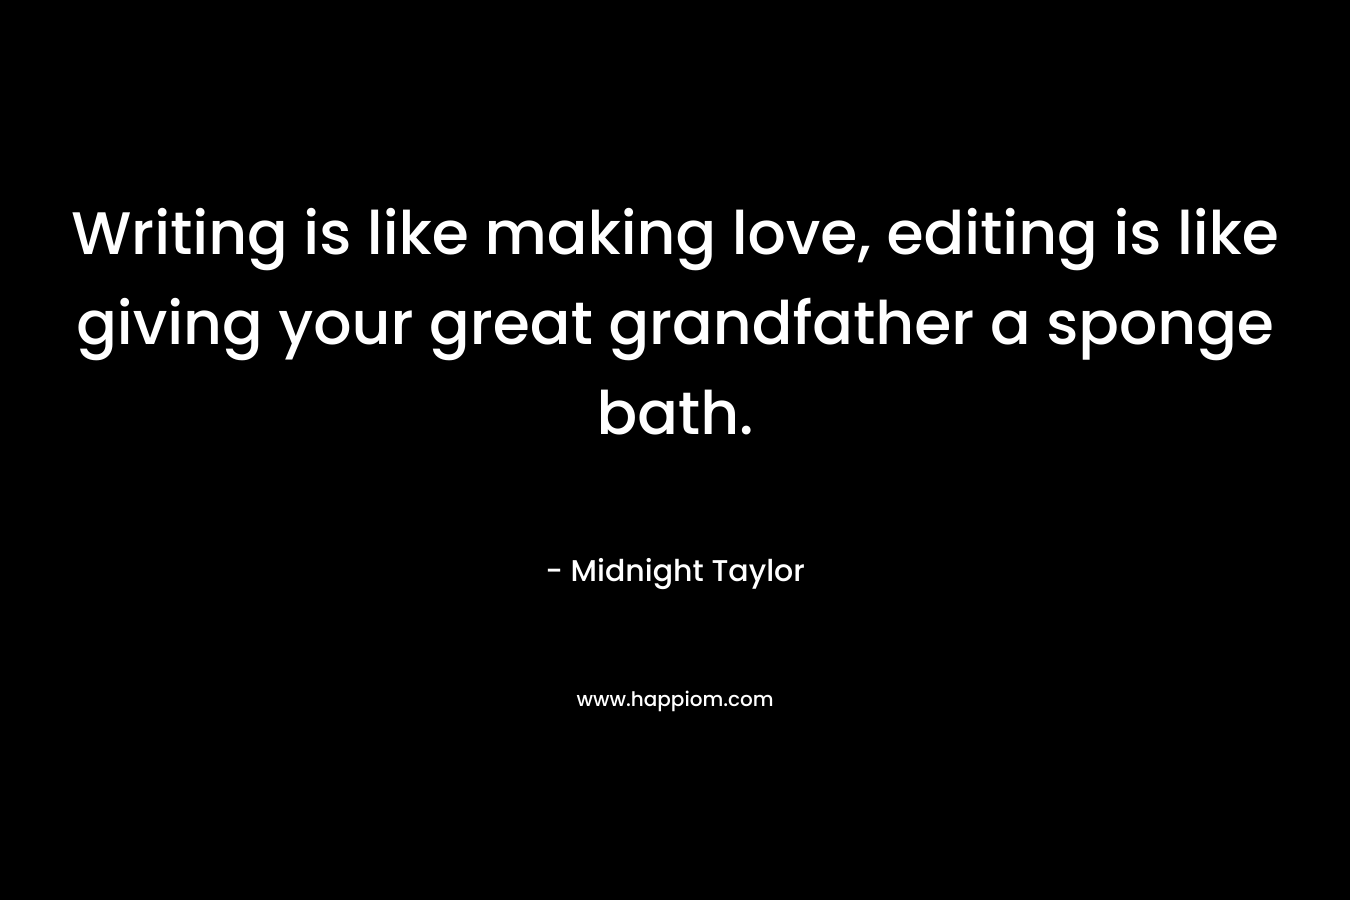 Writing is like making love, editing is like giving your great grandfather a sponge bath.